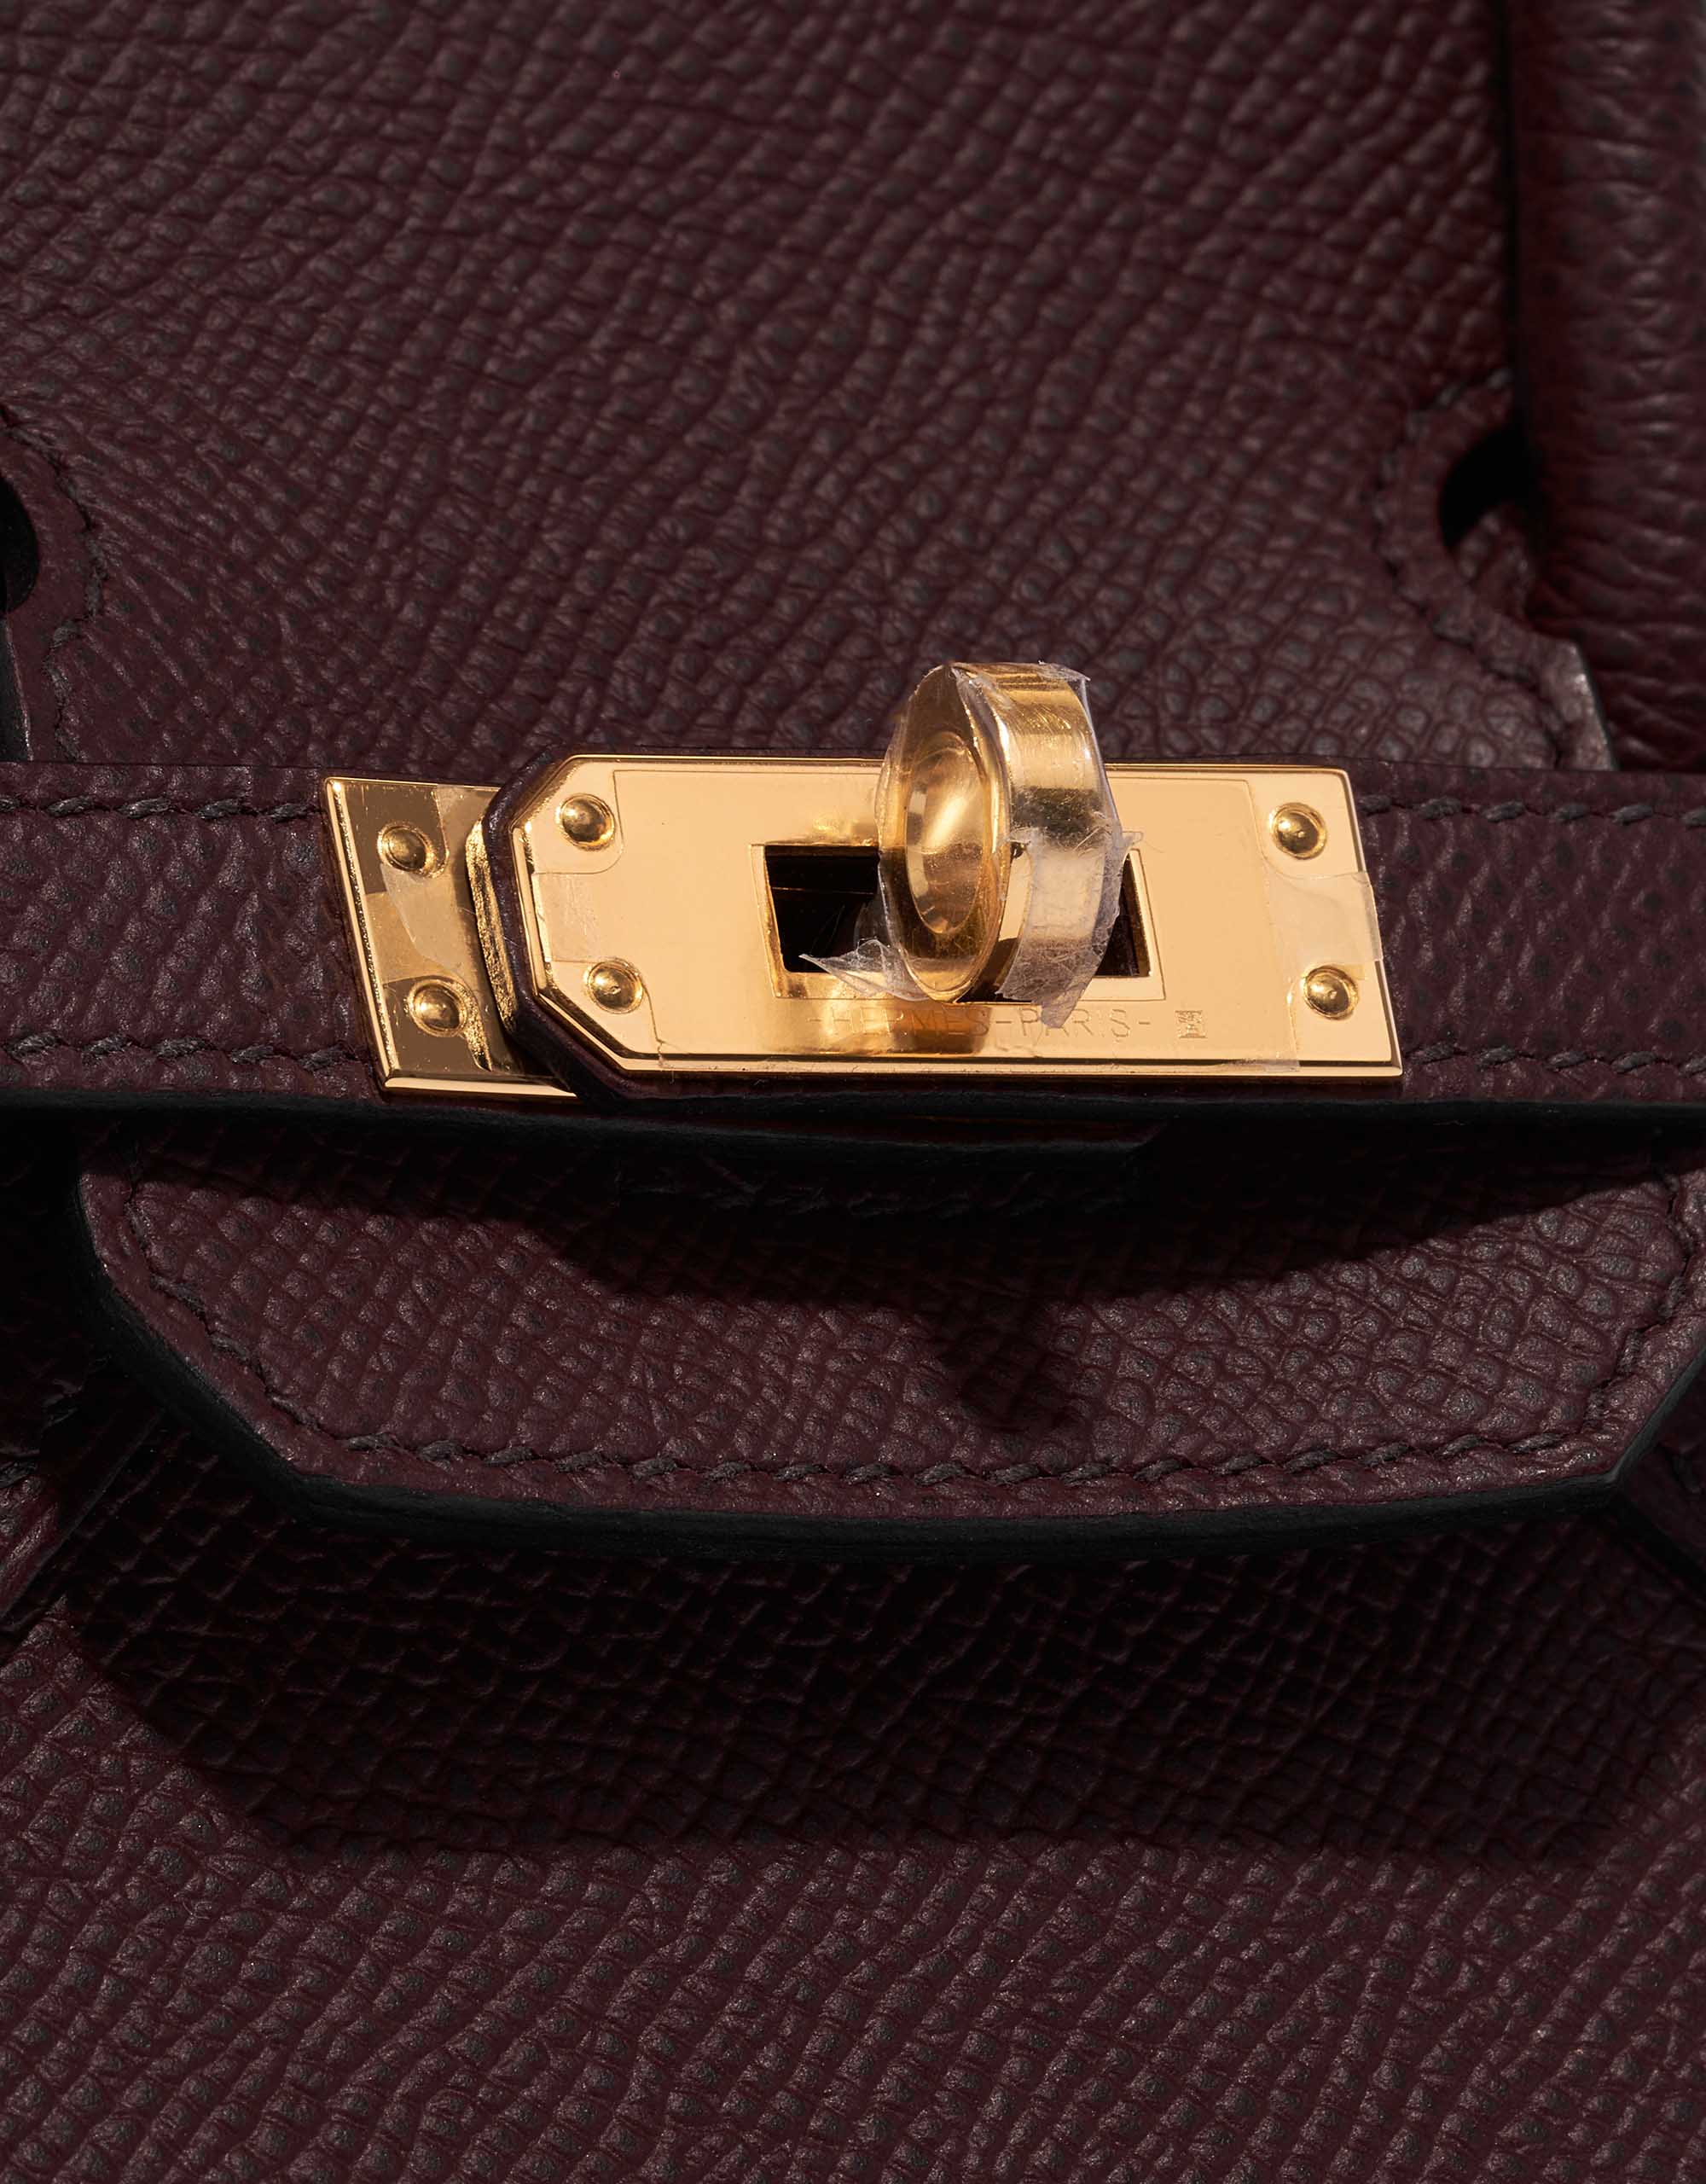 Hermès Birkin Sellier 25 Black Epsom PHW from 100% authentic materials!